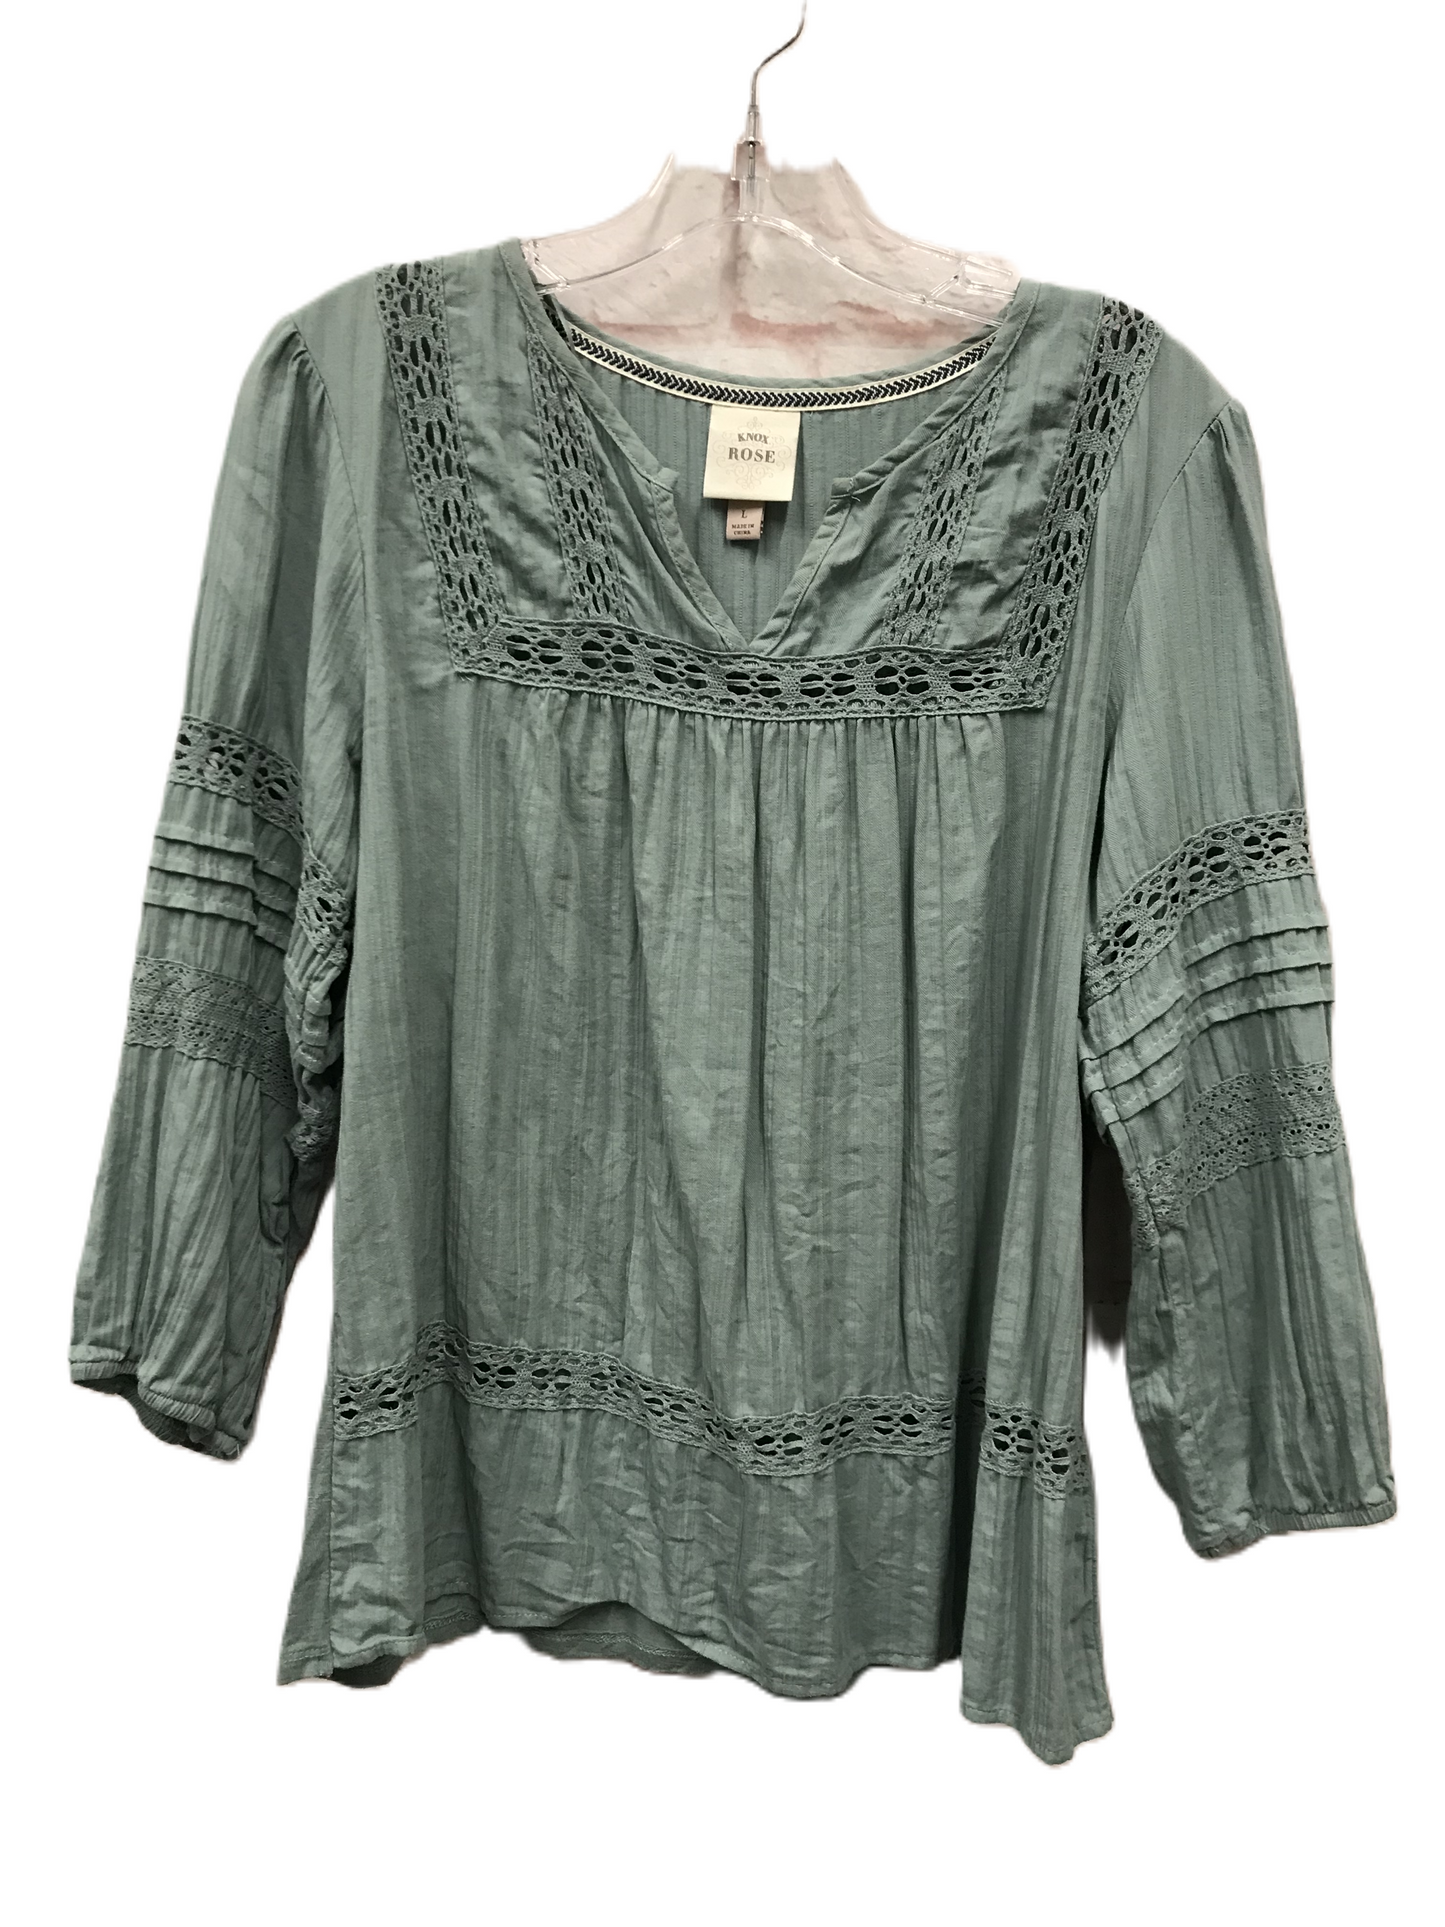 Green Top Long Sleeve By Knox Rose, Size: L